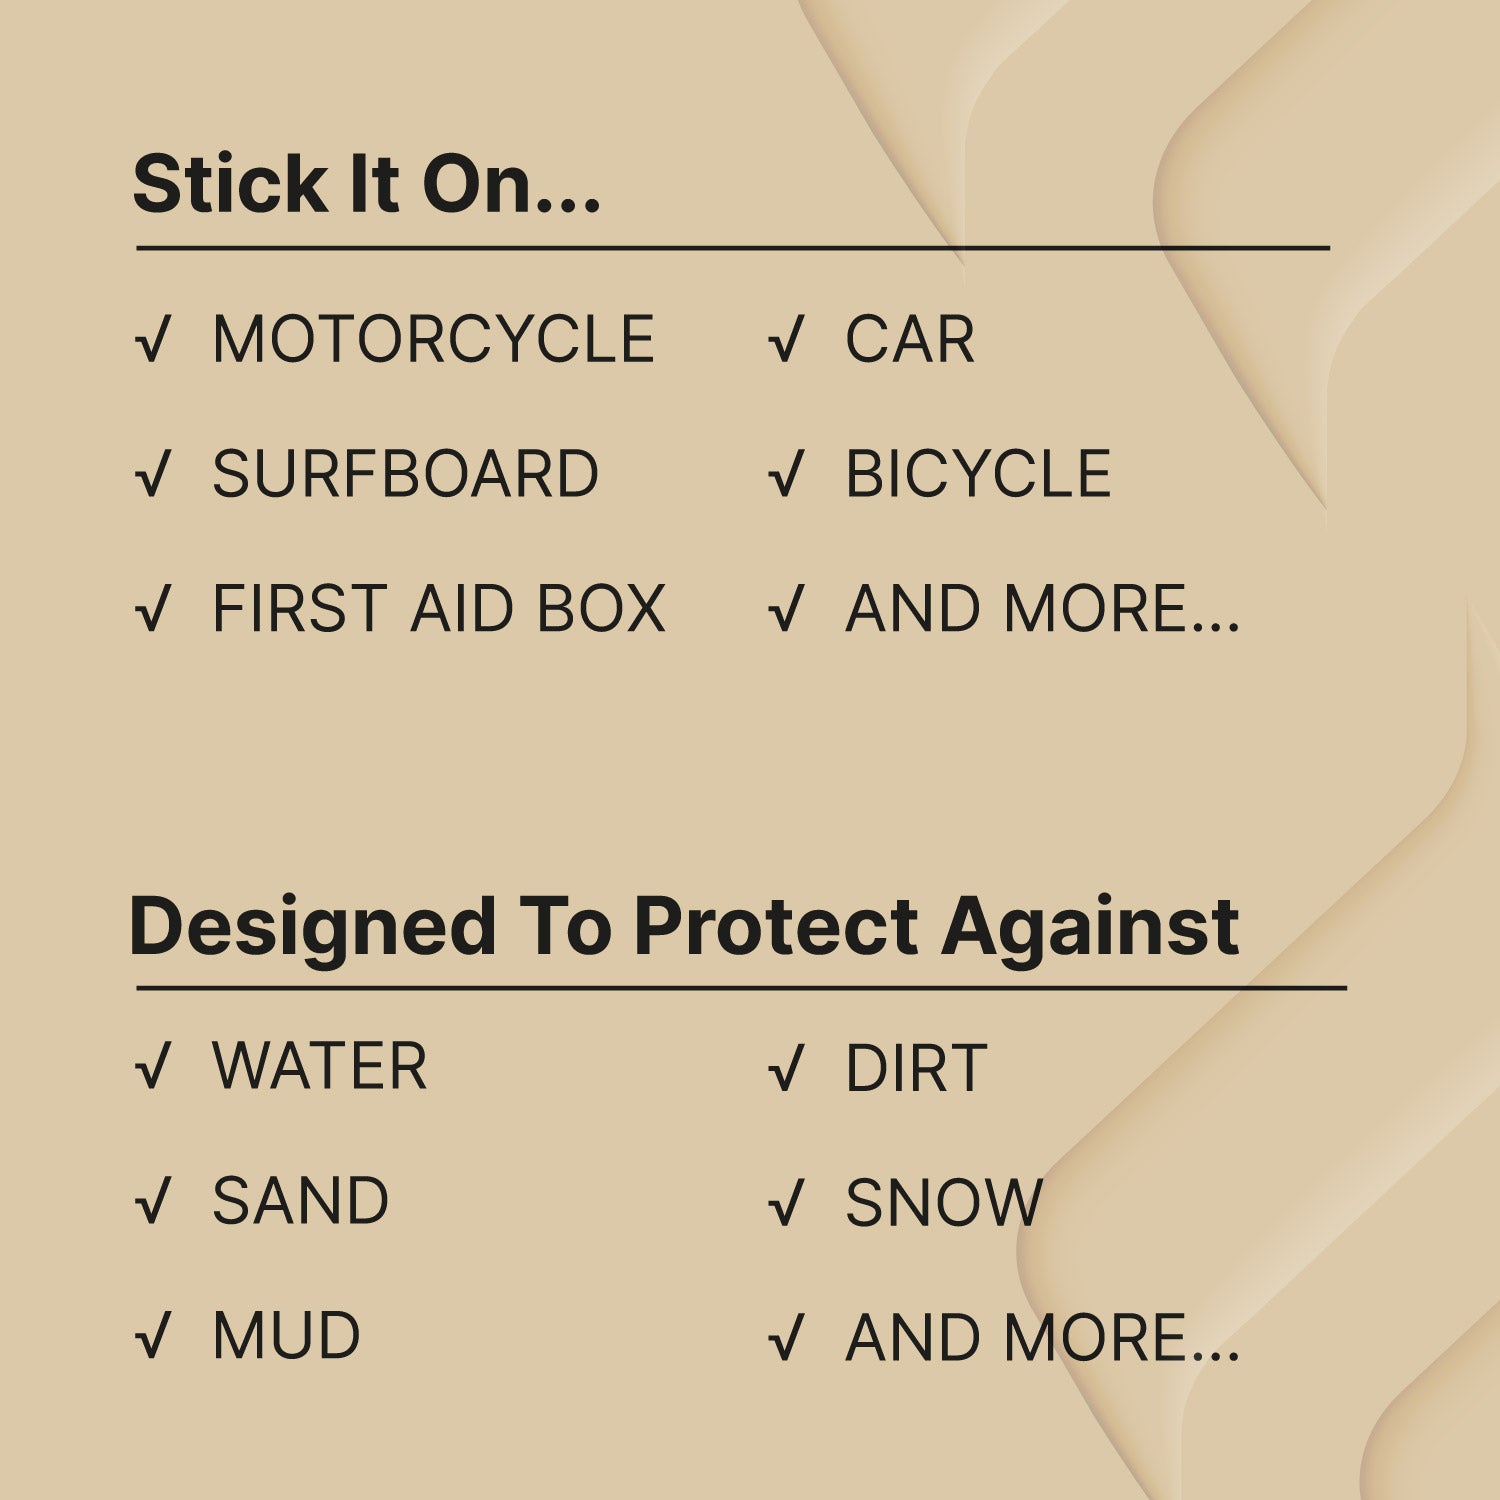 Catalyst airtag total protection case stick it showing where the case can be attach and case features text reads stick on motorcycle surfboard first aid box car bicycle and more designed to protect against water sand mud dirt snow and more